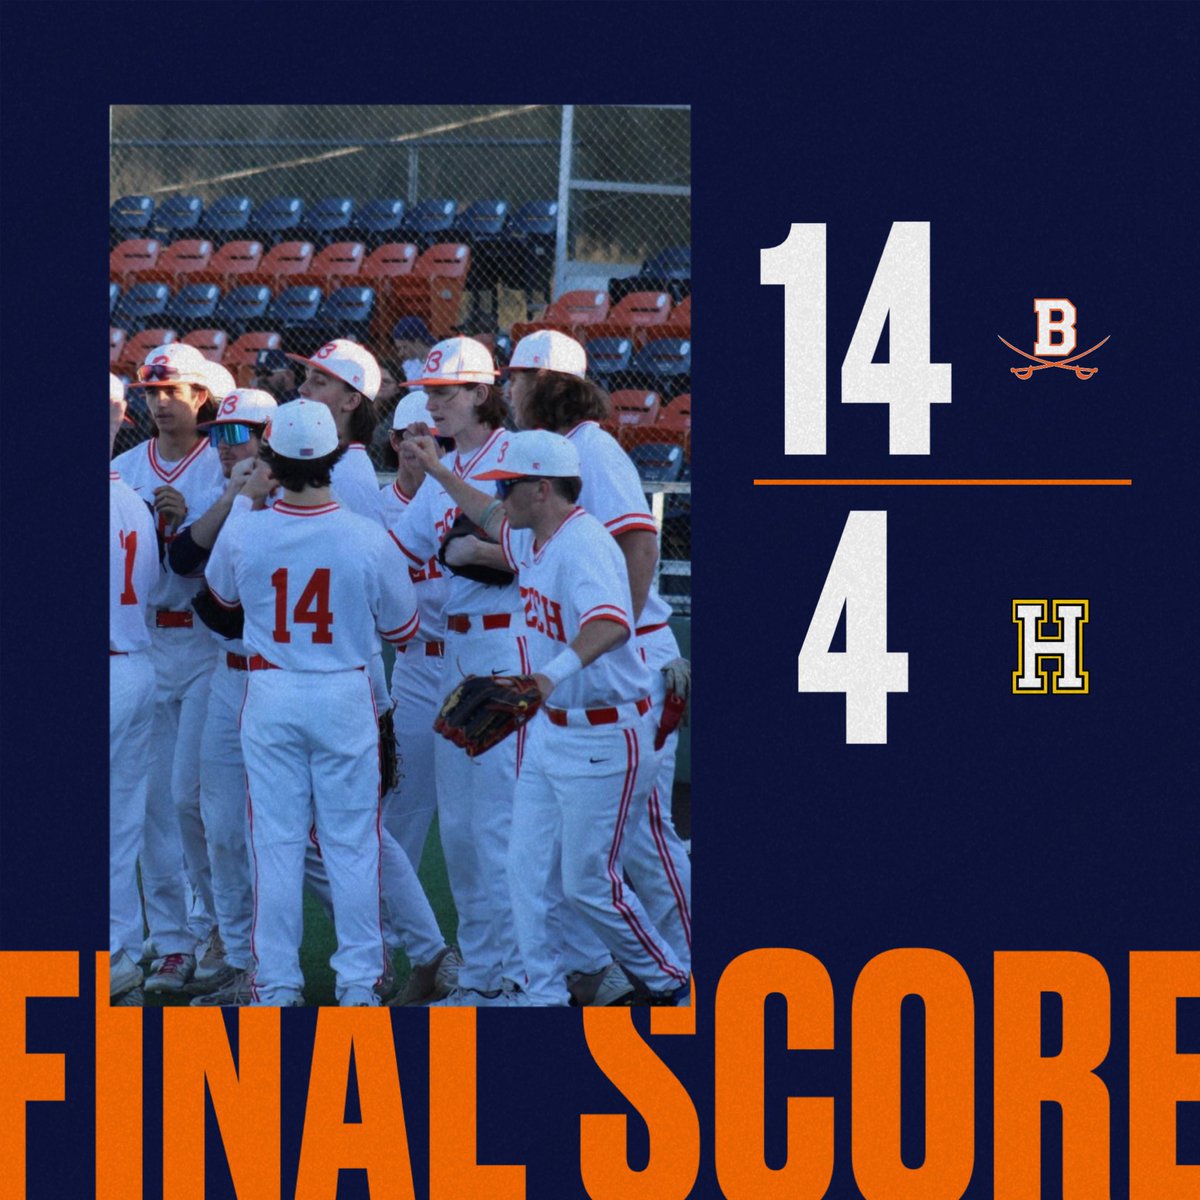 The Bucs had a big win over Hendersonville tonight at home. Total of 12 hits, @dchambliss0523 & @Kadenpowell2026 both hit a homer & @maddoxgalbreath @Earls23Jackson & Wyatt Davis had multiple hits. @cooper_johnson5 earned the win on the mound! 6IP/9H/3ER/8K Way to go Bucs!